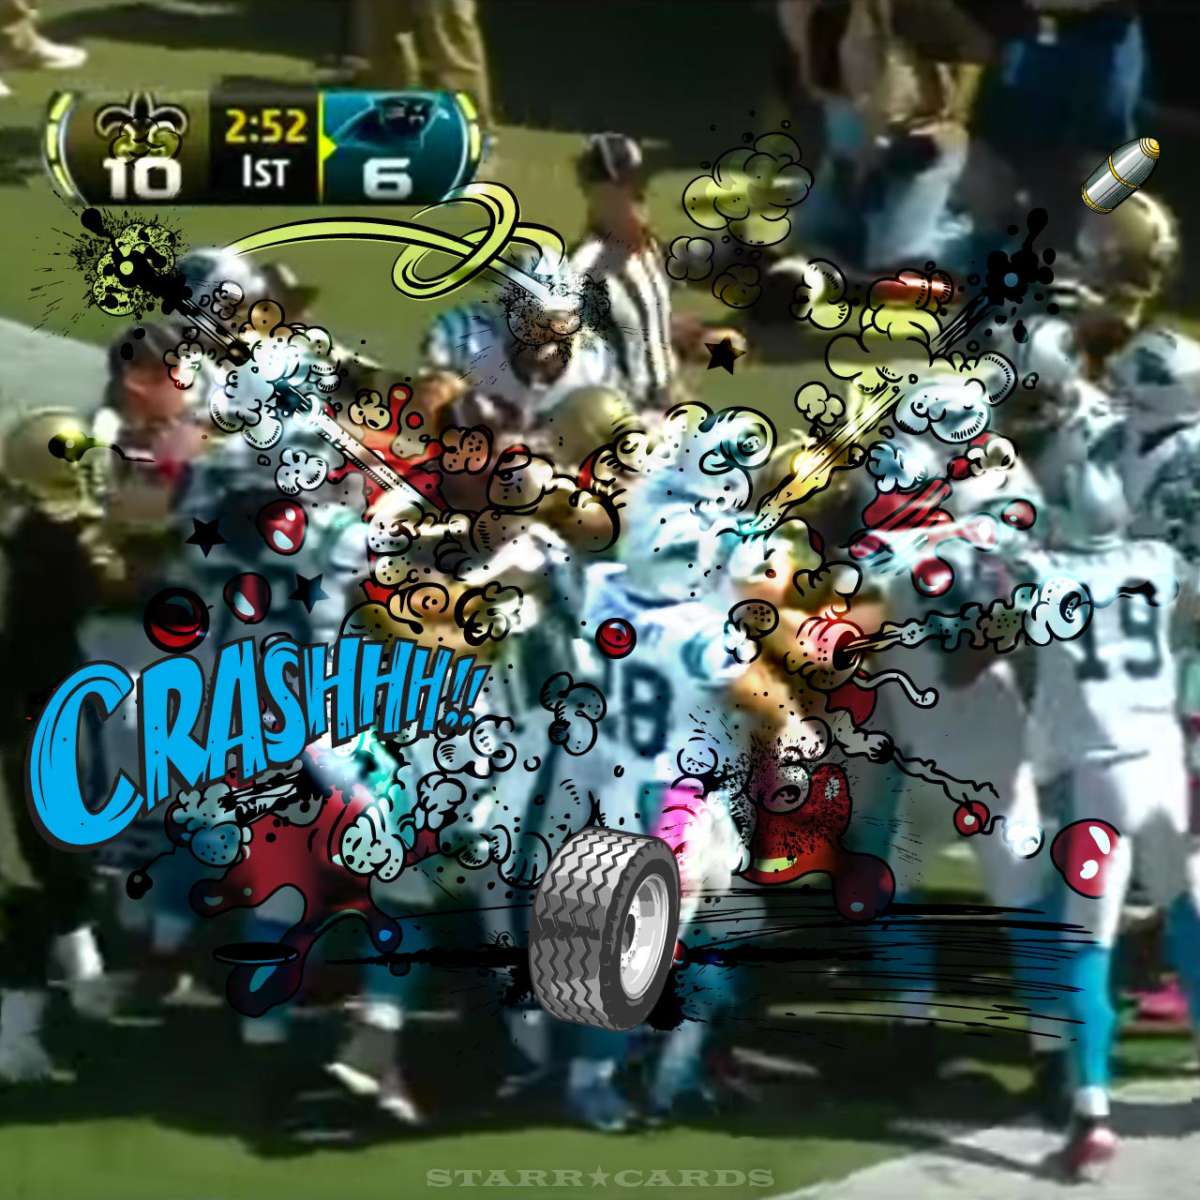 Panthers, Saints and Texans dominate top 5 craziest NFL onfield fights